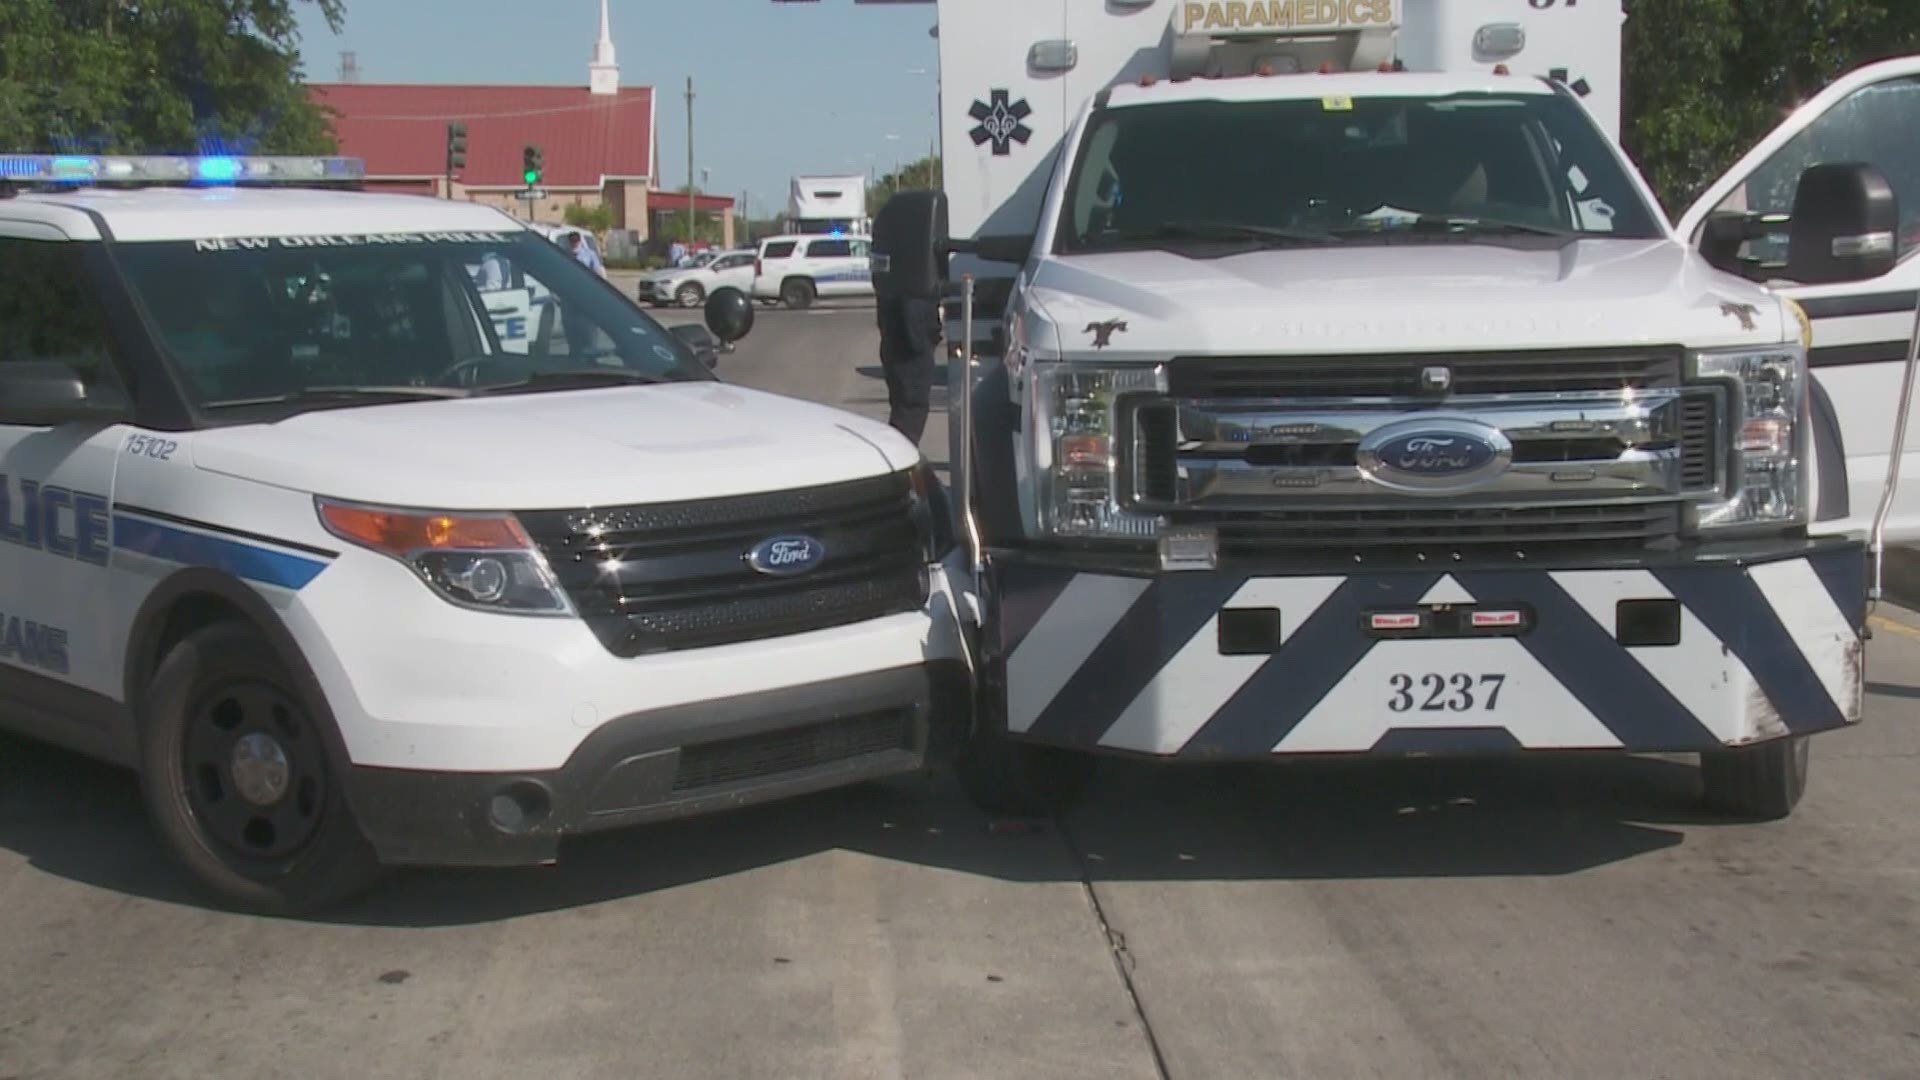 A man stole an ambulance from Touro hospital Thursday. No injuries reported but NOPD is investigating why he took it.